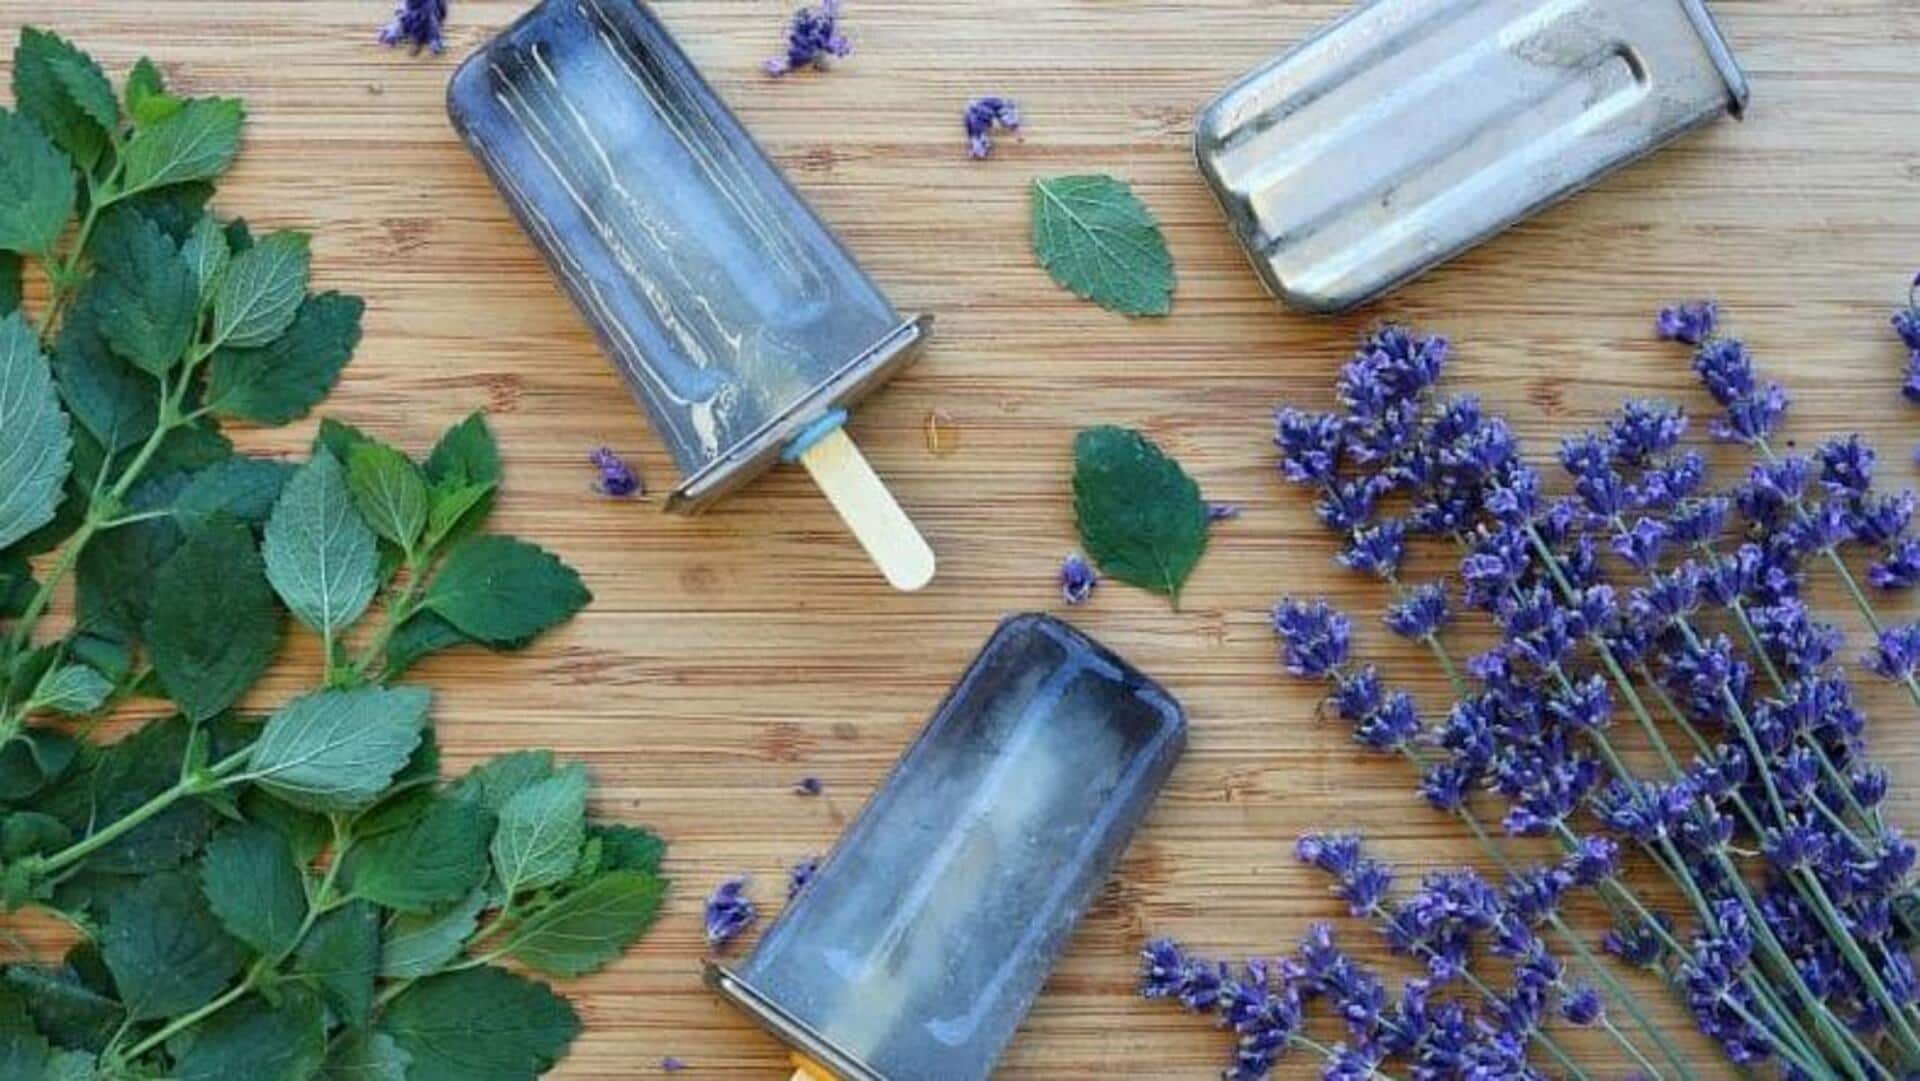 Recipe: Beat the heat with these lavender lemonade popsicles